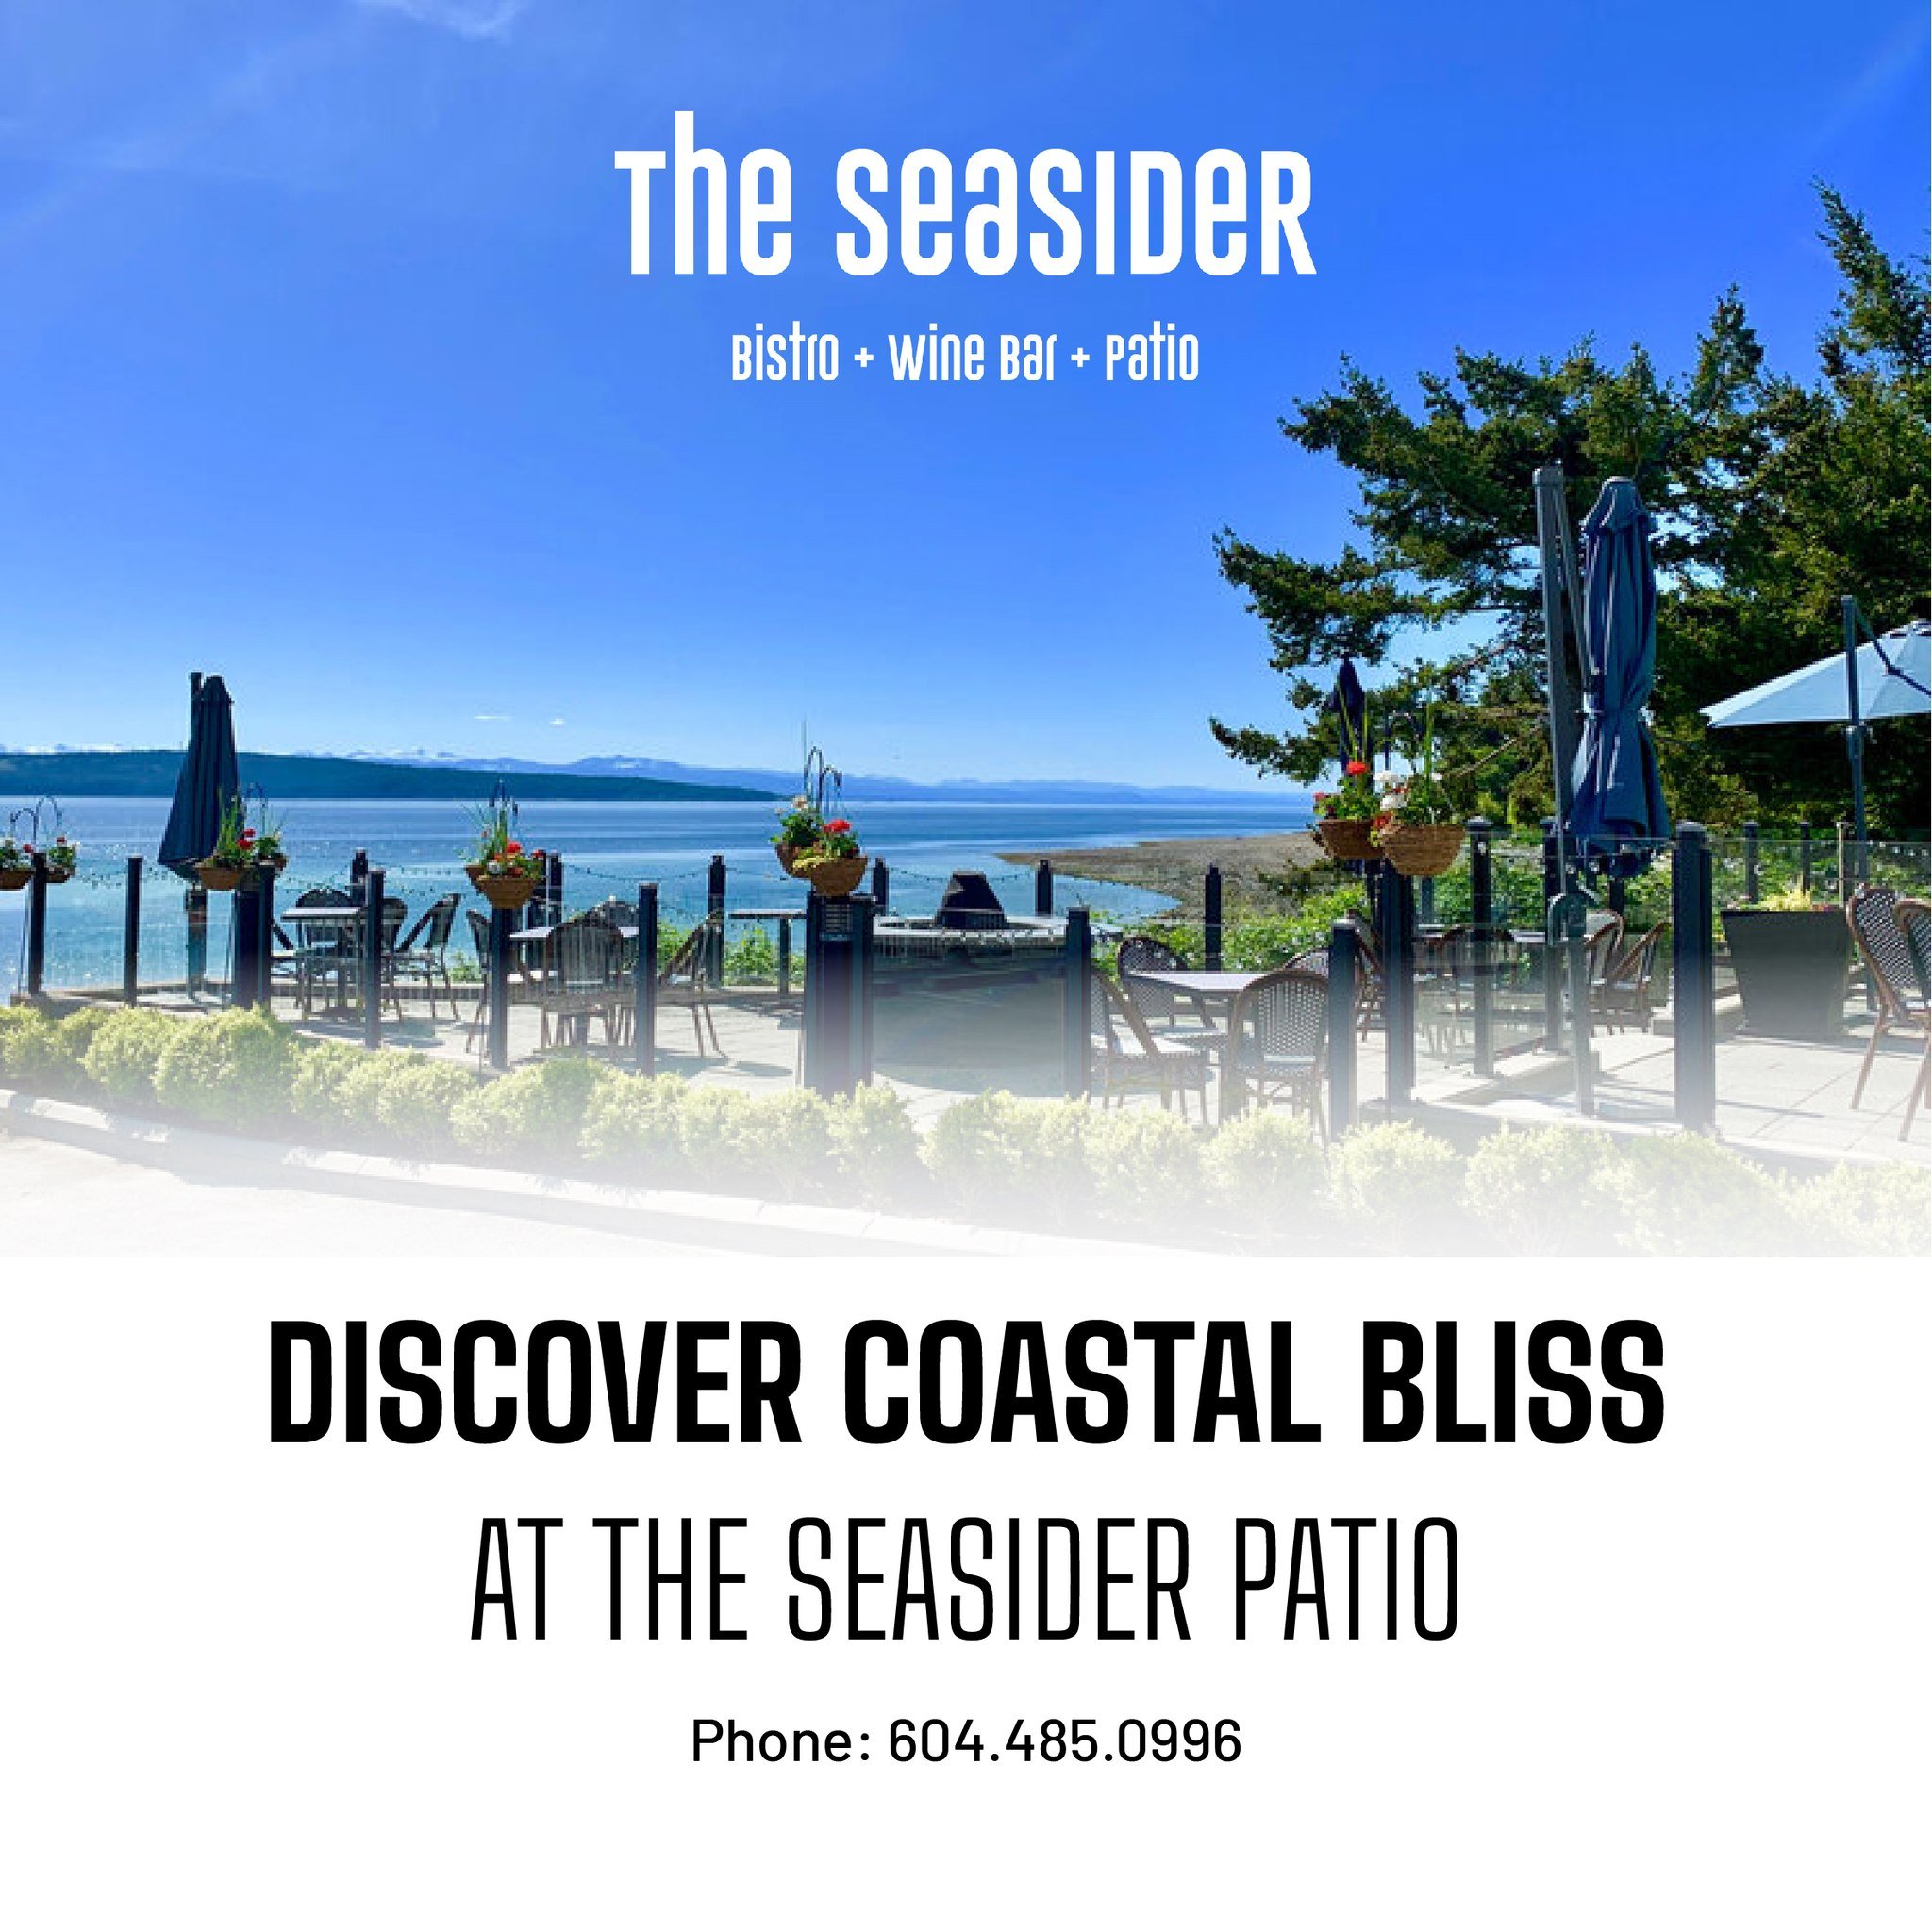 Discover Coastal Bliss at The Seasider Patio

Nestled along the picturesque coastline, The Seasider's patio invites you to unwind in style against a backdrop of breathtaking ocean views. Whether you're sipping cocktails with friends or enjoying a rom